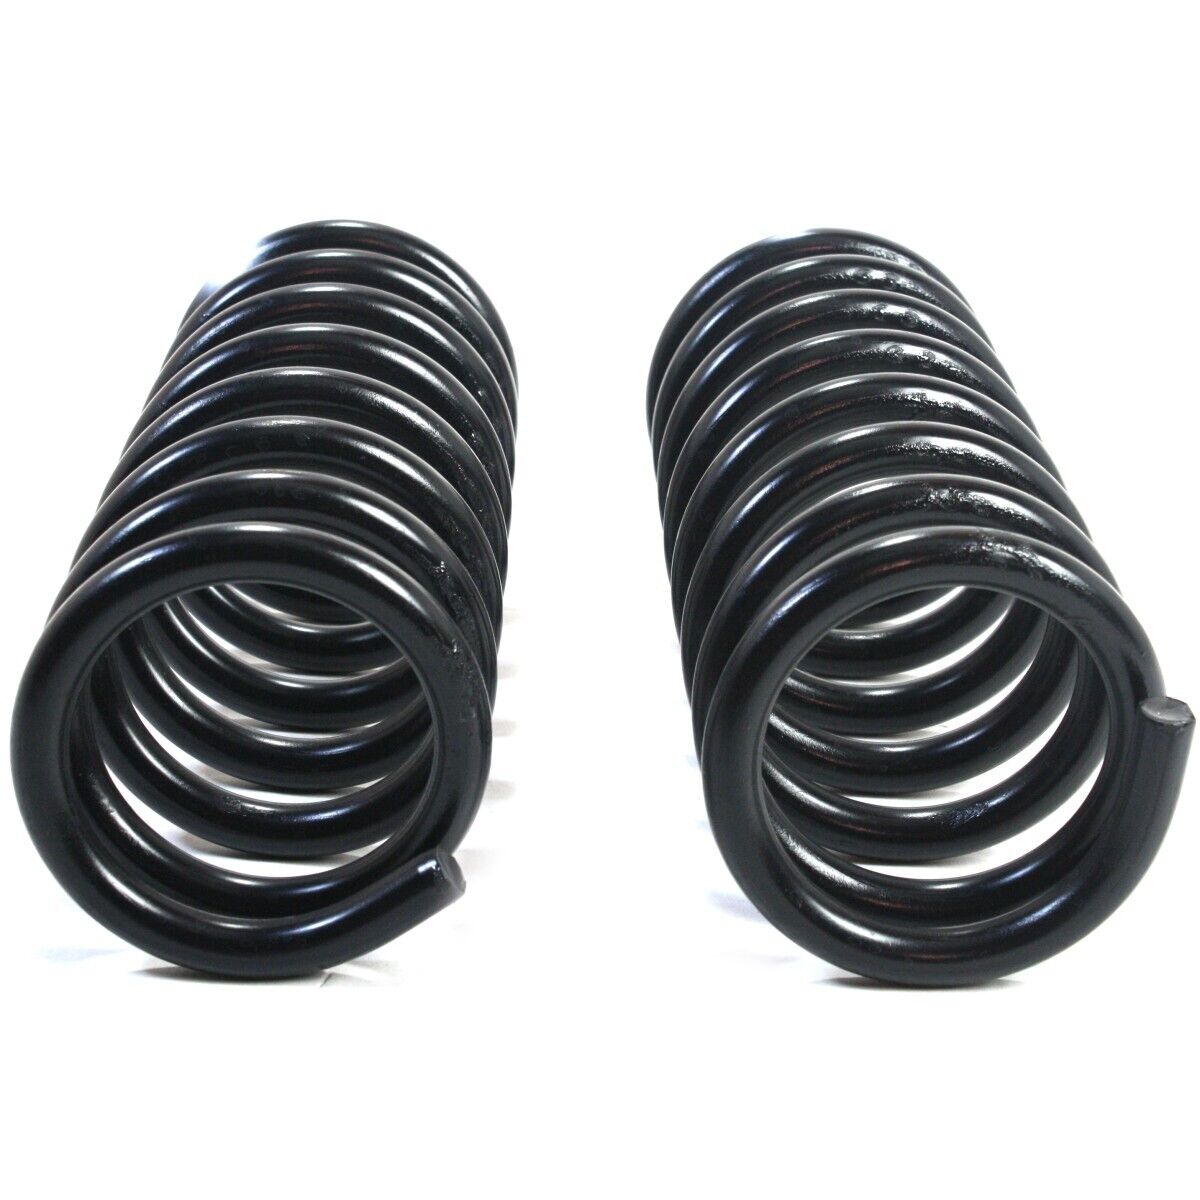 5608 Moog Coil Springs Set of 2 Front for Chevy Olds Cutlass Coupe Sedan Pair